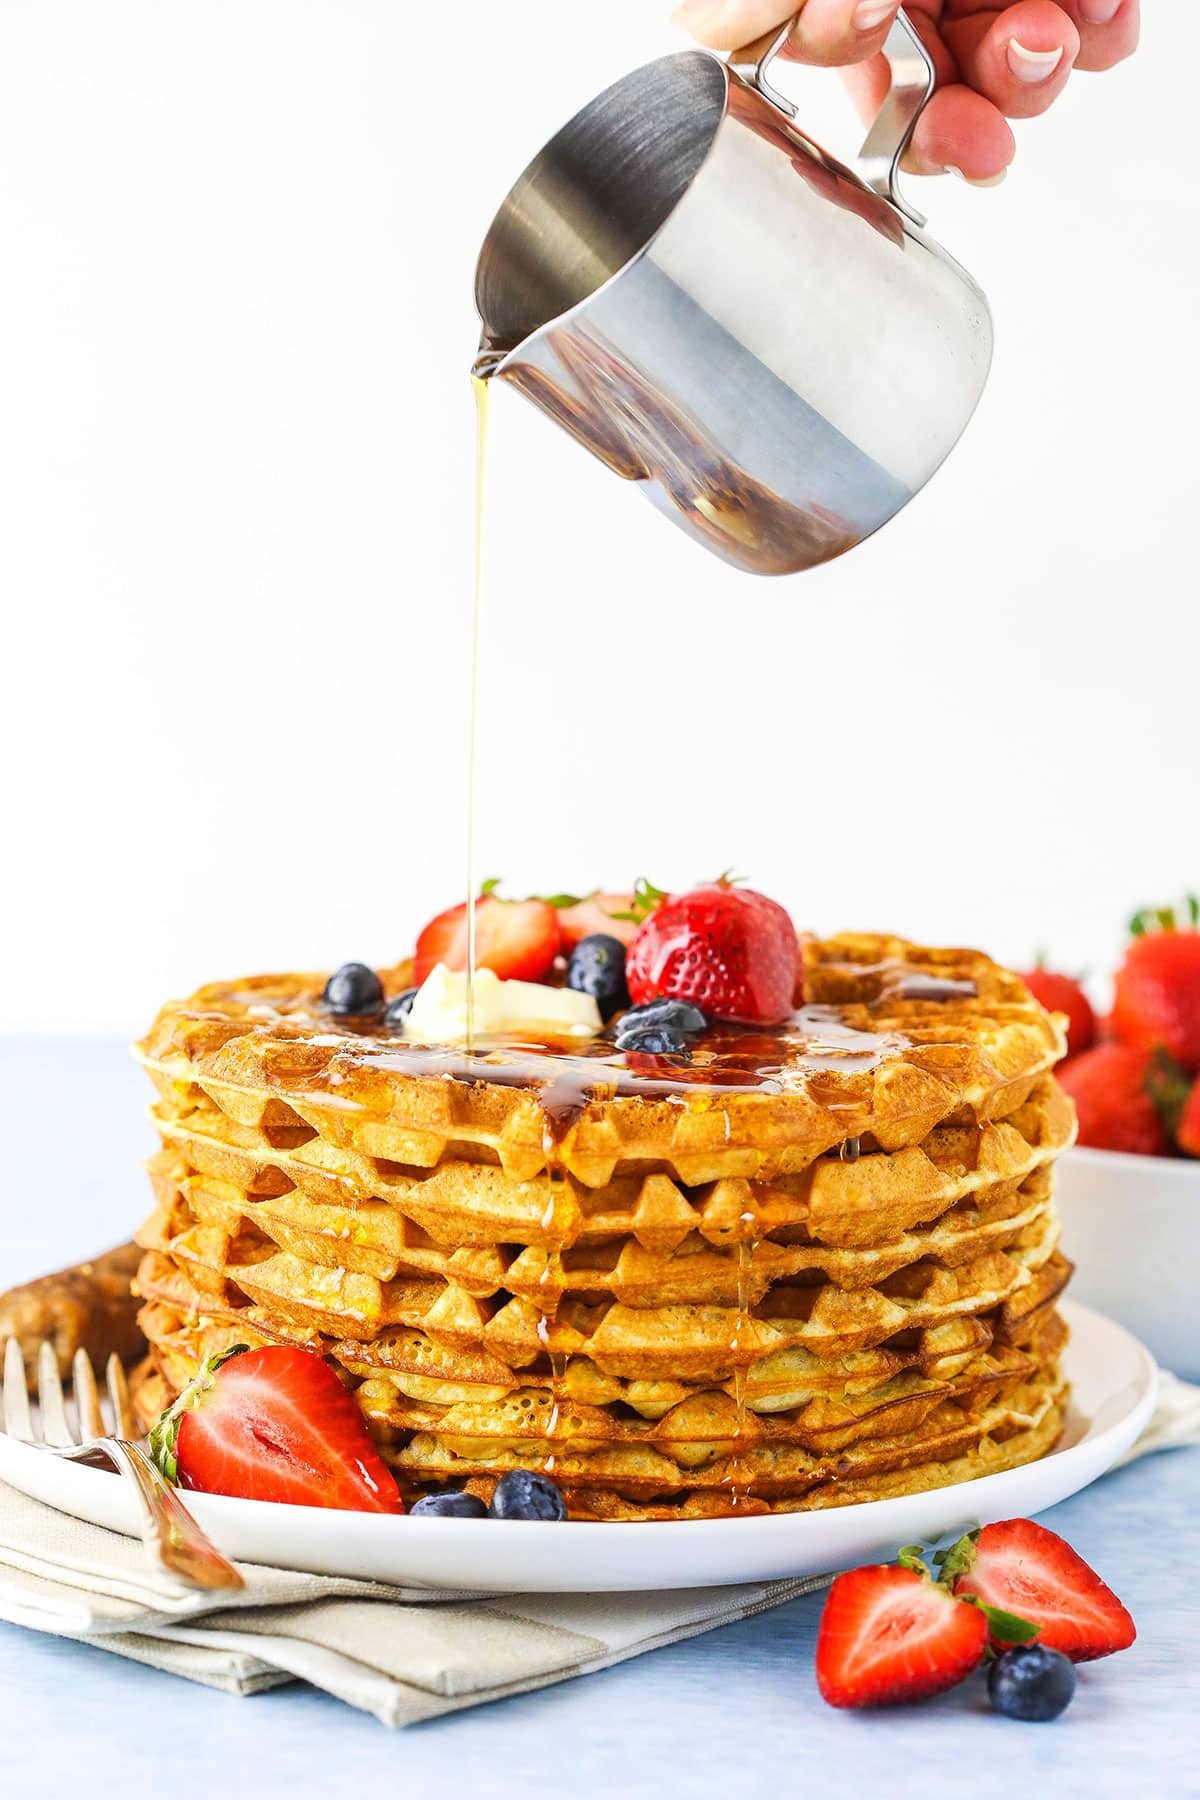 pouring syrup onto stack of waffles